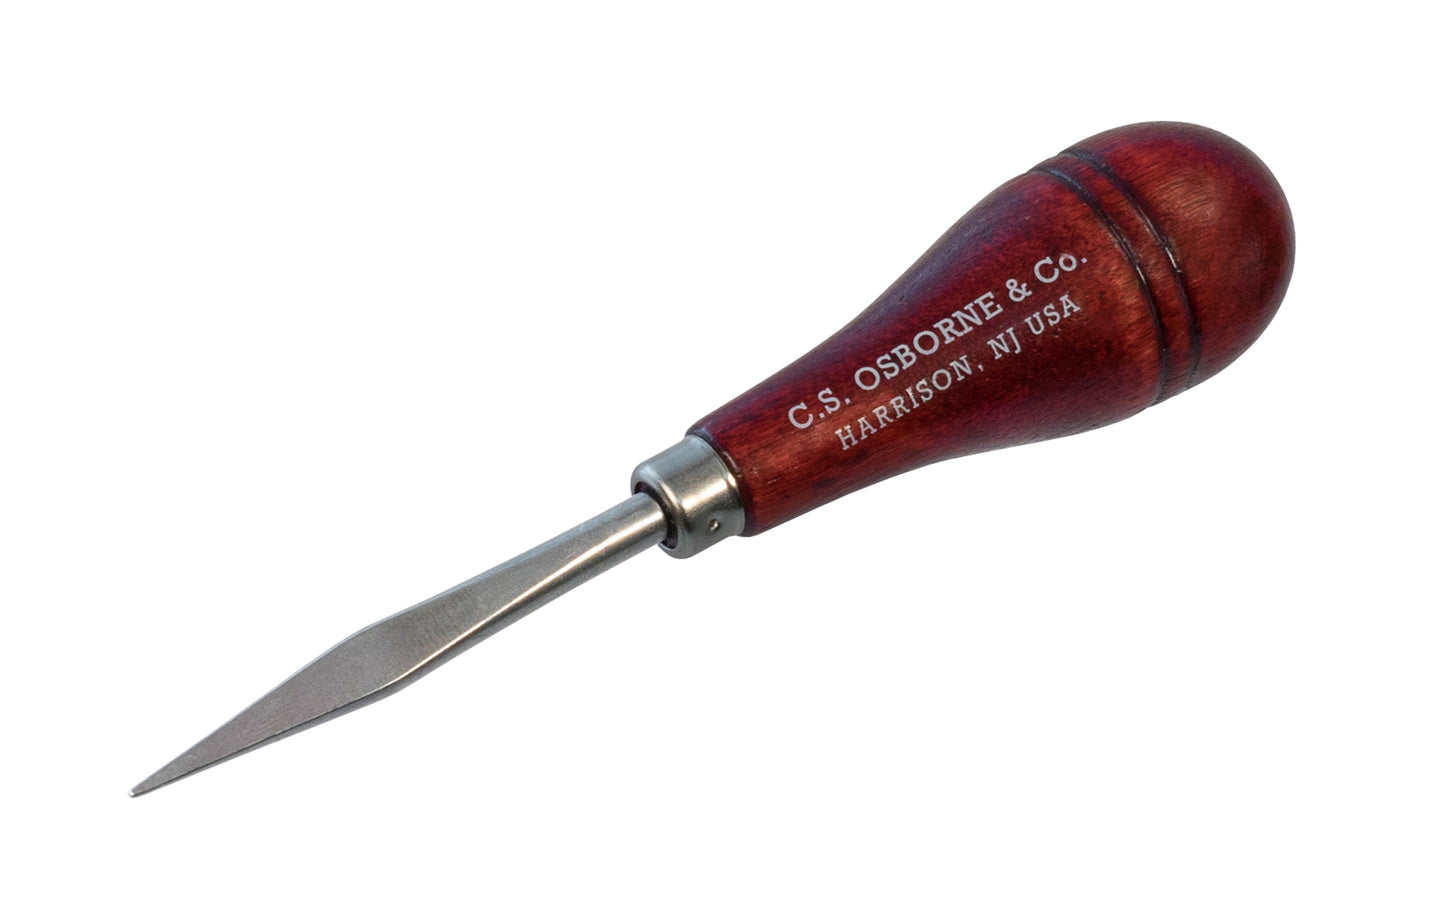 CS Osborne Fid ~ No. 477 - Blunt awl for stretching & enlarging holes in leather for easy lacing. Also used for stippling, tightening or loosening knots - Hardwood wooden handle ~ Made in USA ~ 096685676364